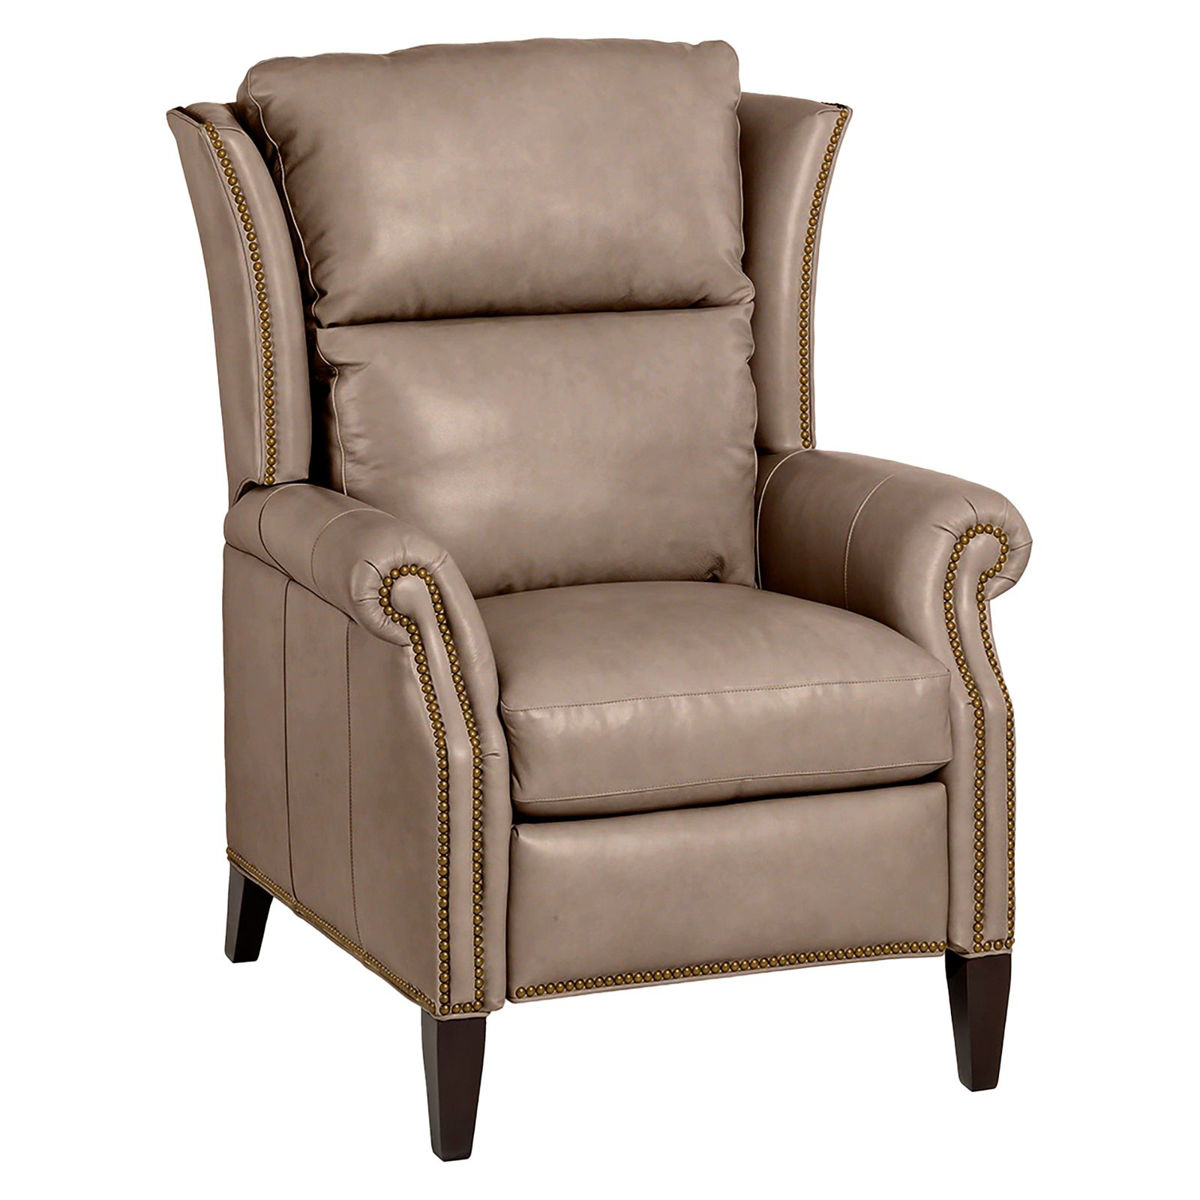 Picture of Sami All Leather Hi-Leg Recliner